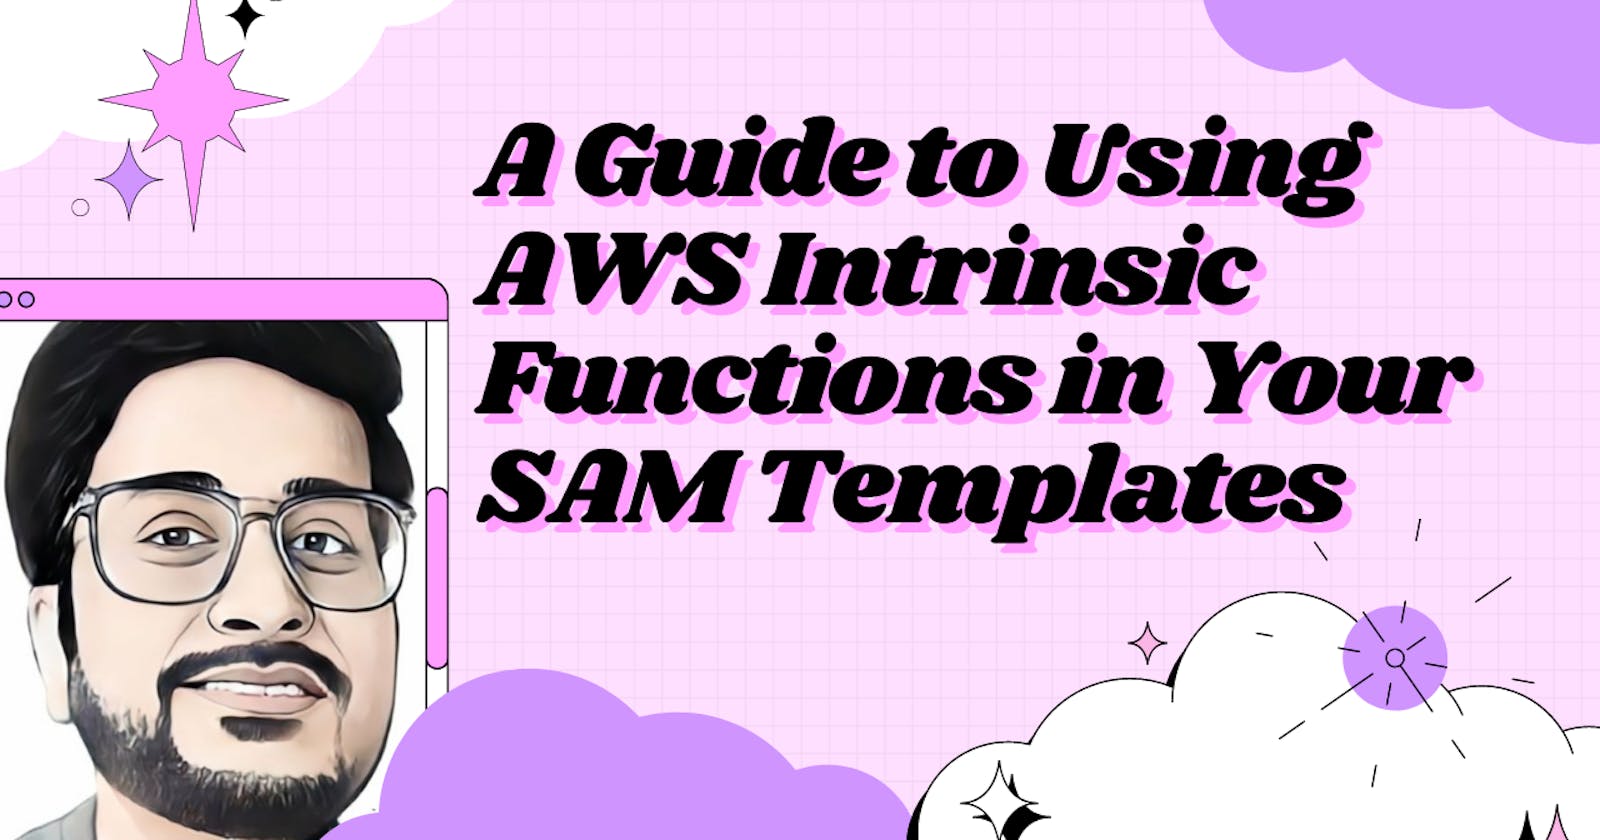 A Guide to Using AWS Intrinsic Functions in Your SAM Templates